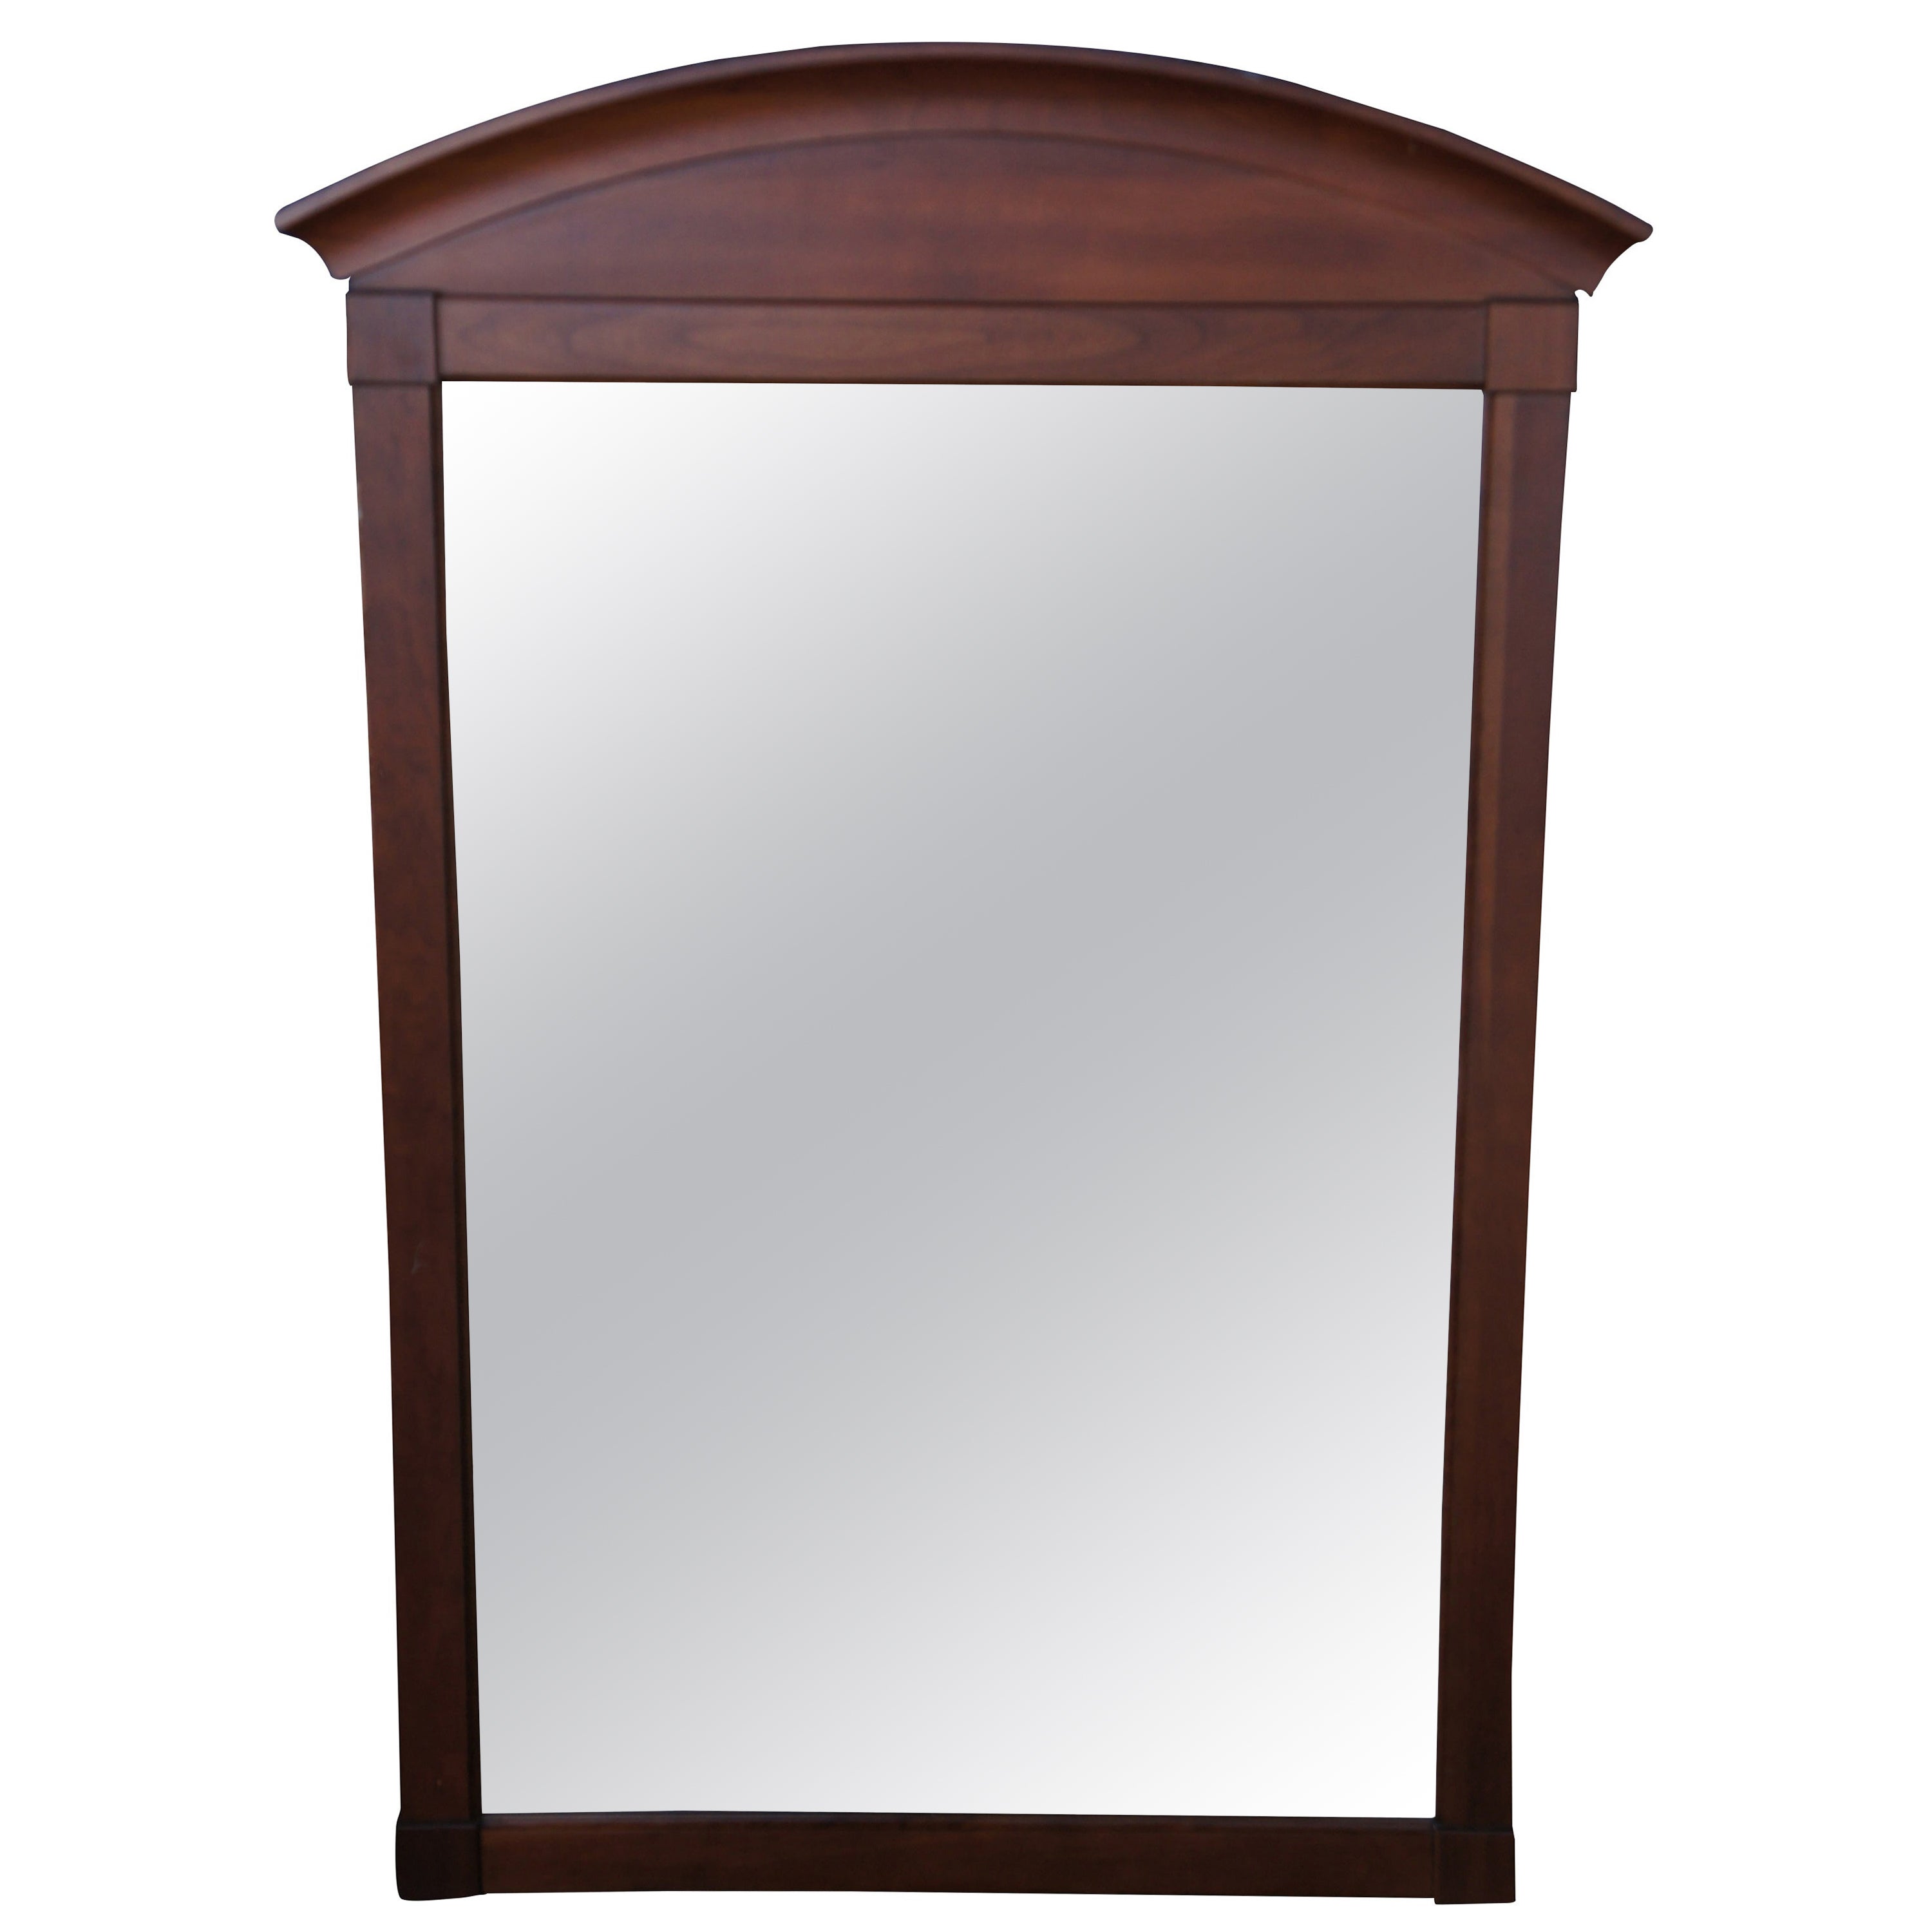 Ethan Allen American Impressions Country Cherry Beveled Arched Mirror 24-5410 